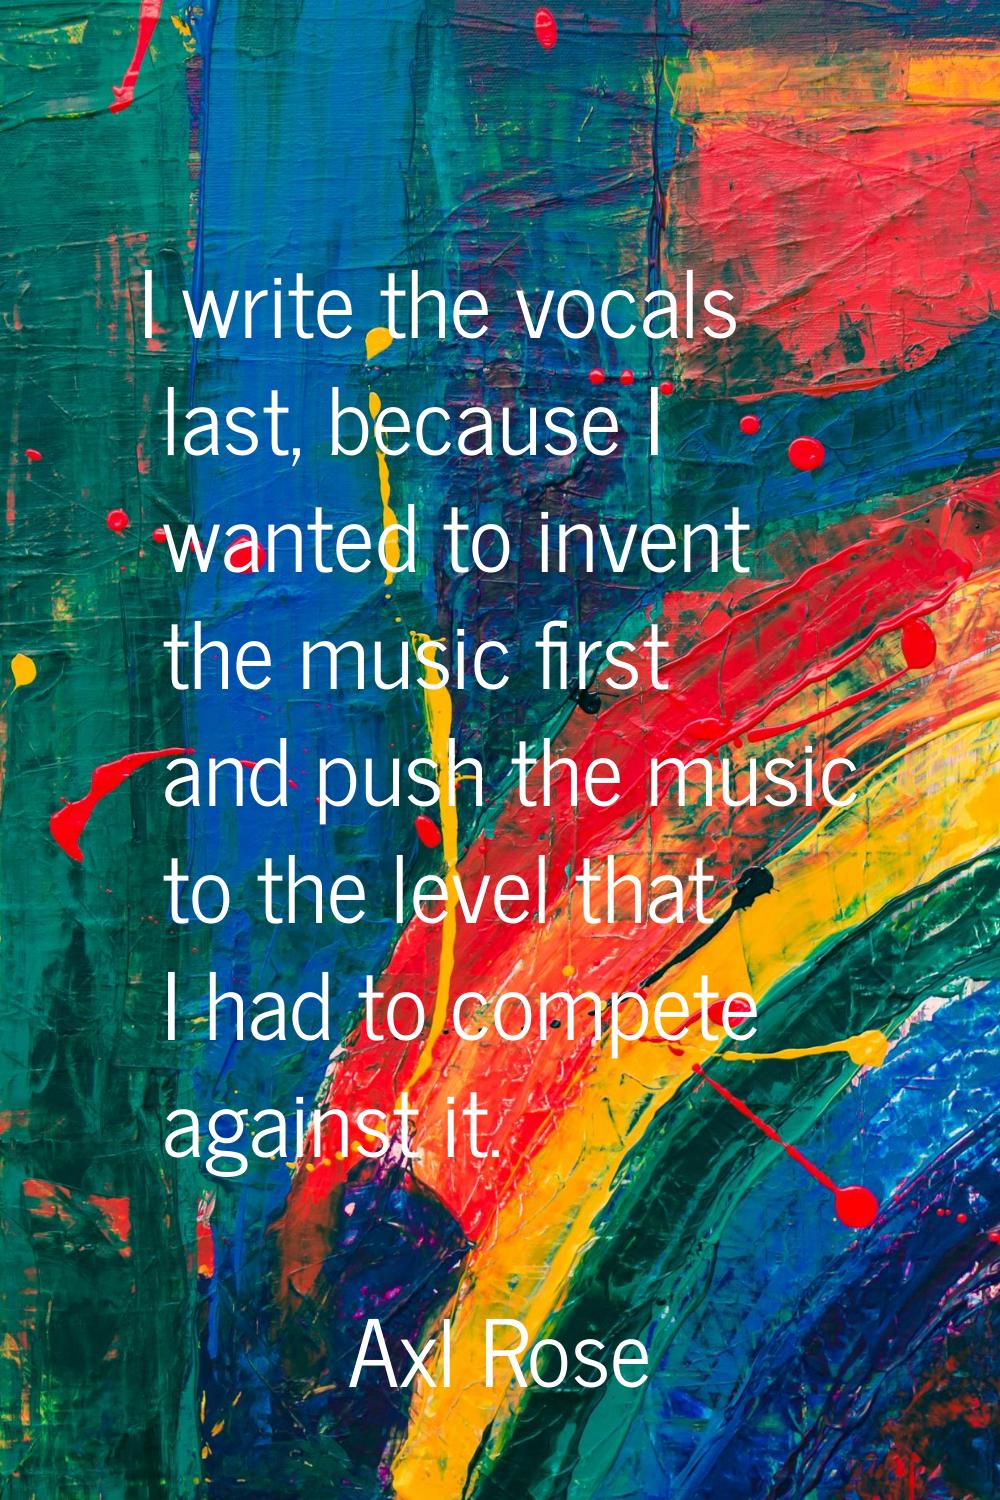 I write the vocals last, because I wanted to invent the music first and push the music to the level